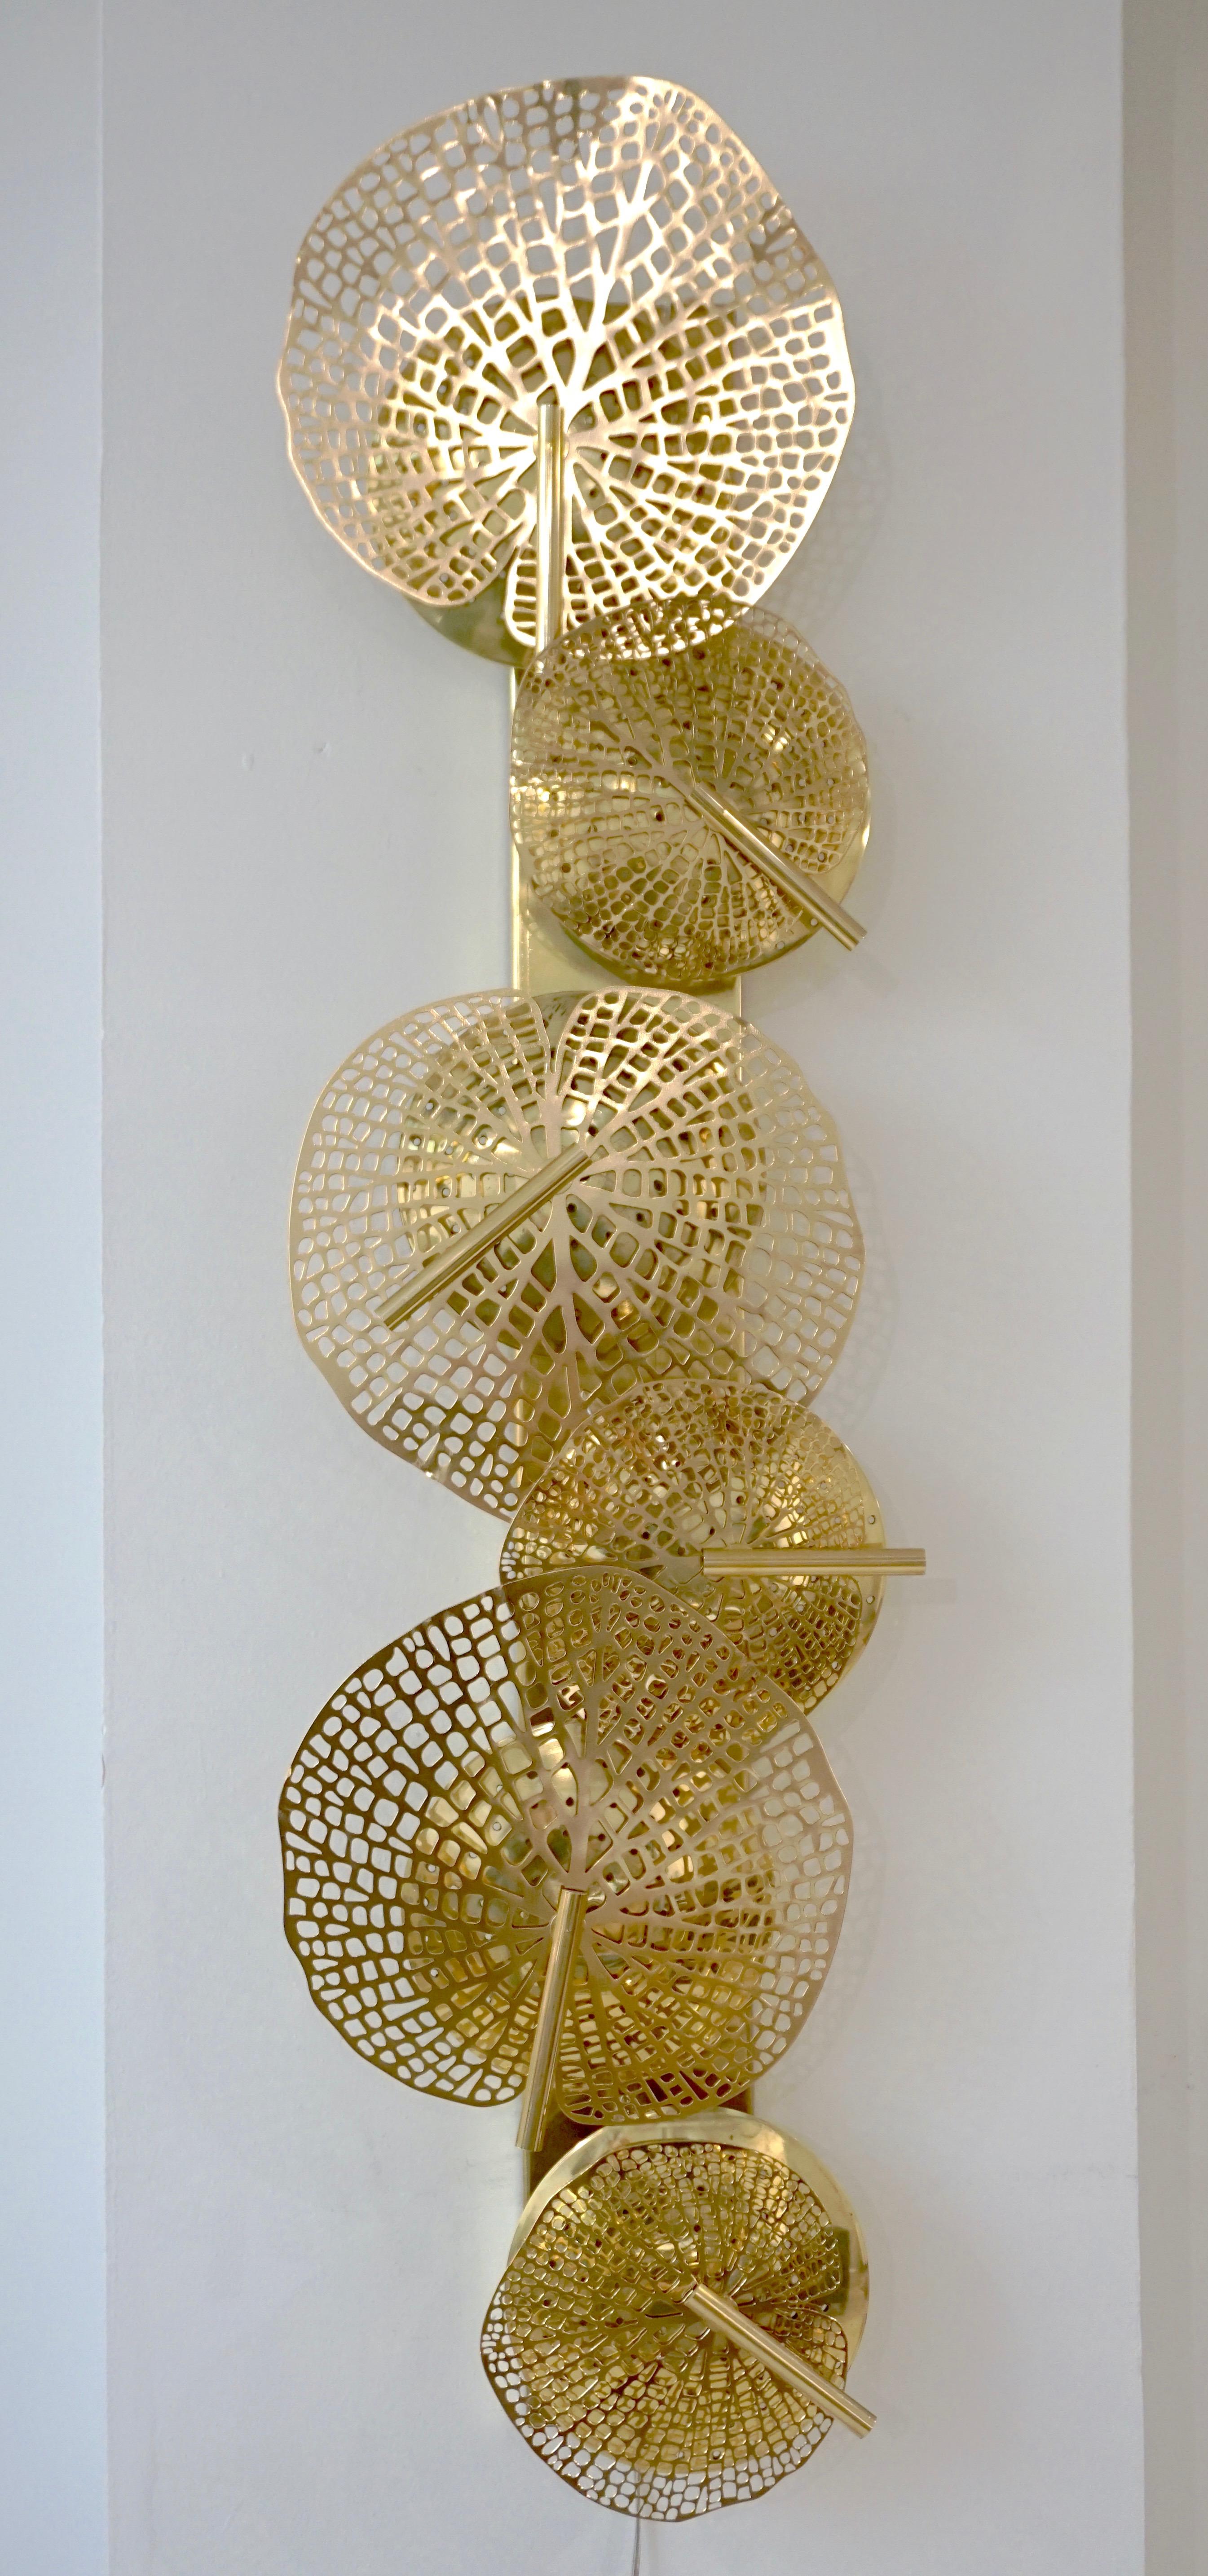 Contemporary Organic Italian Art Design Pair of Perforated Brass Leaf Sconces For Sale 11